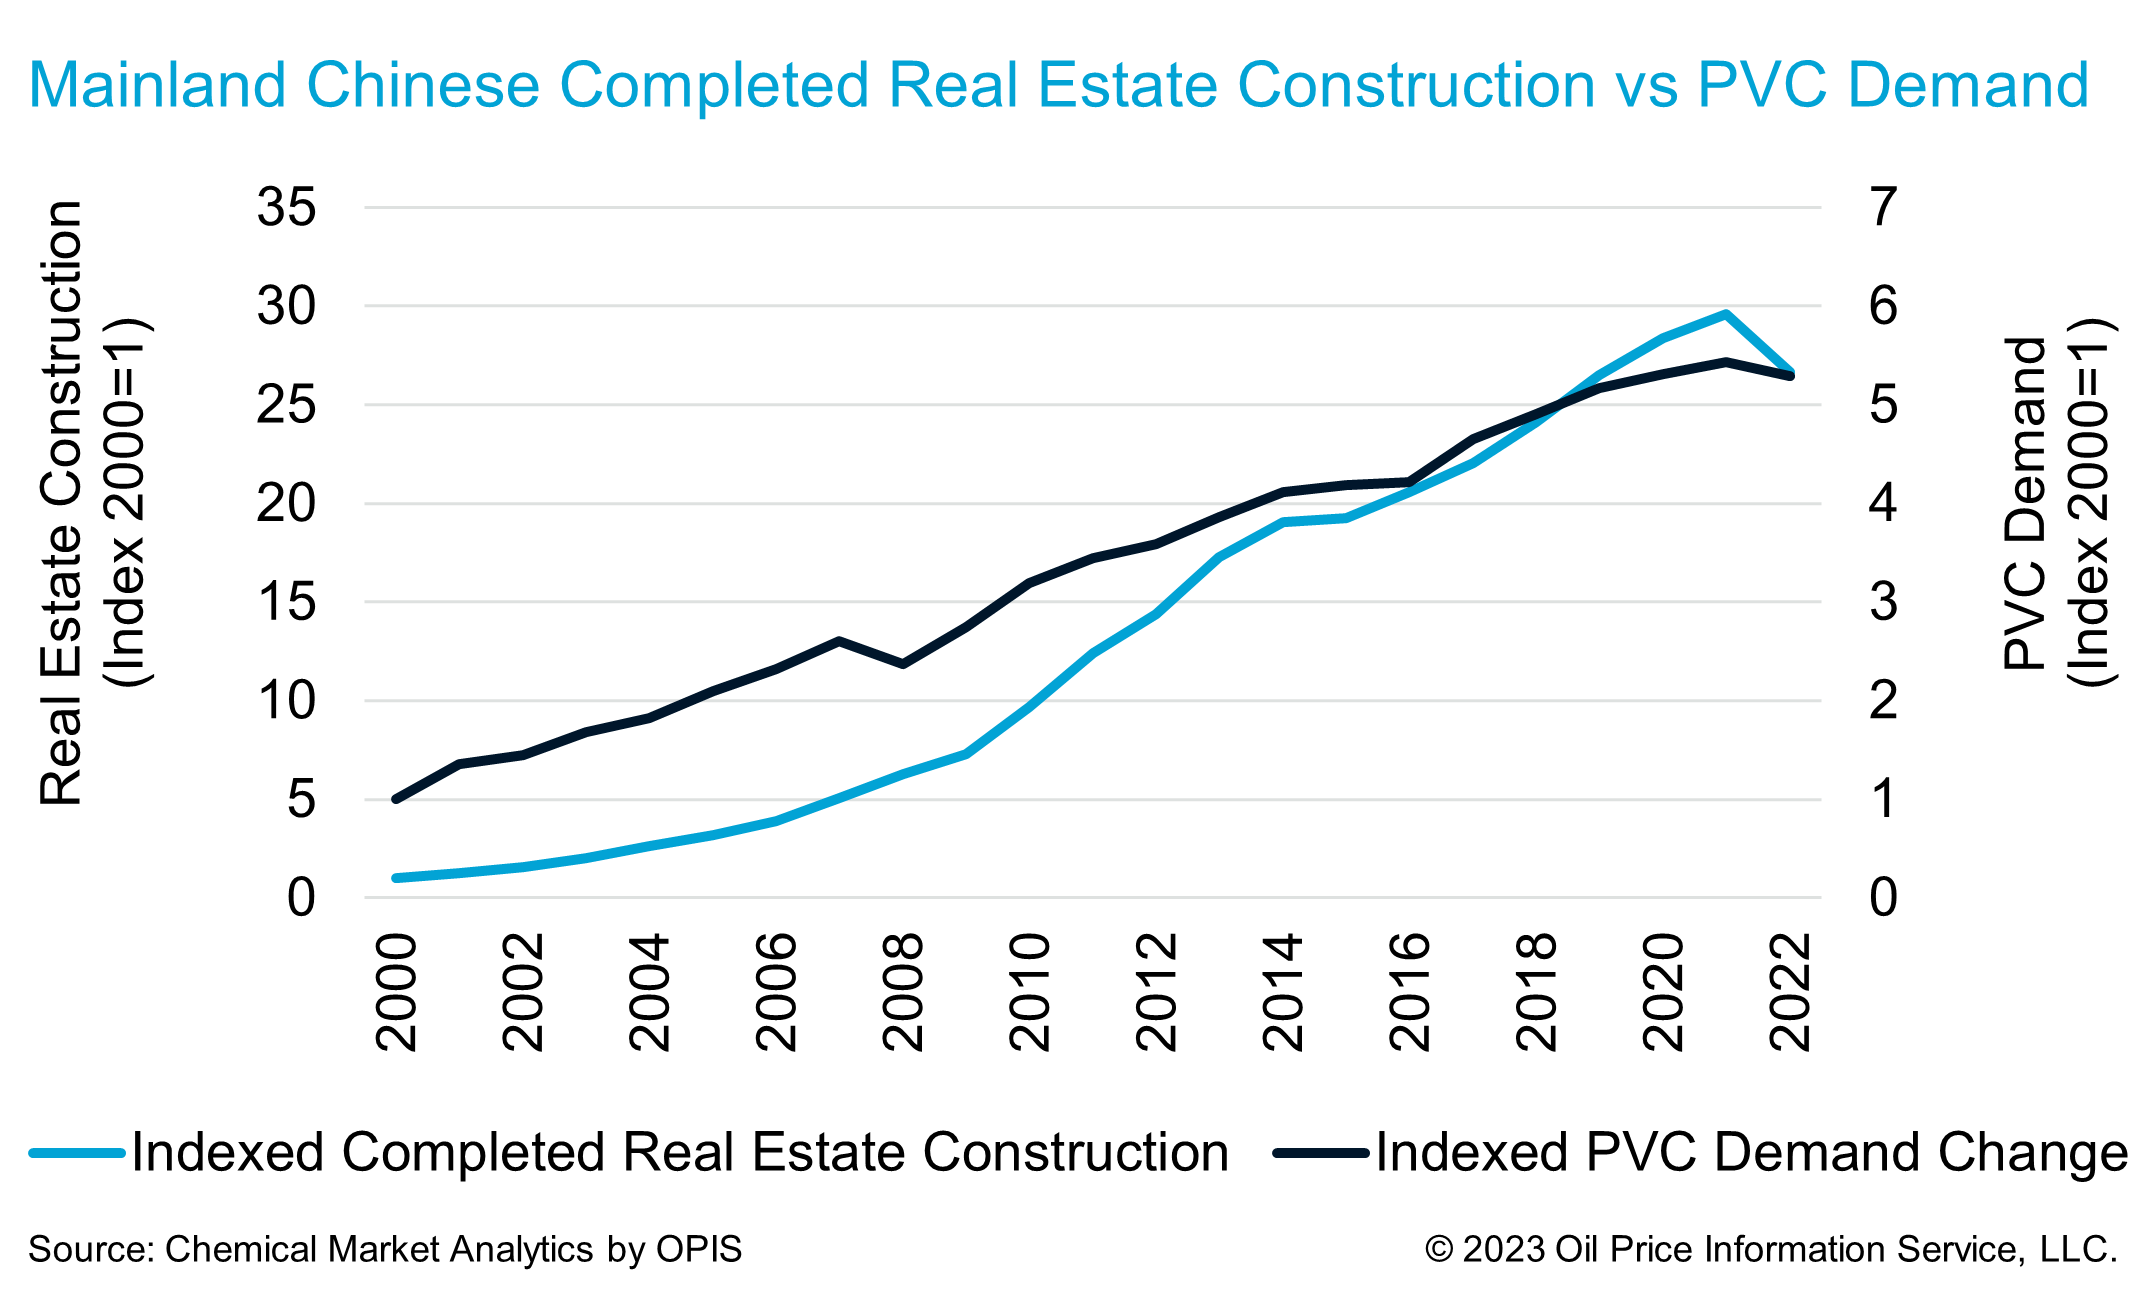 Polyvinyl Chloride (PVC) Market Analysis: Mainland Chinese Completed Real Estate Construction vs PVC Market Demand